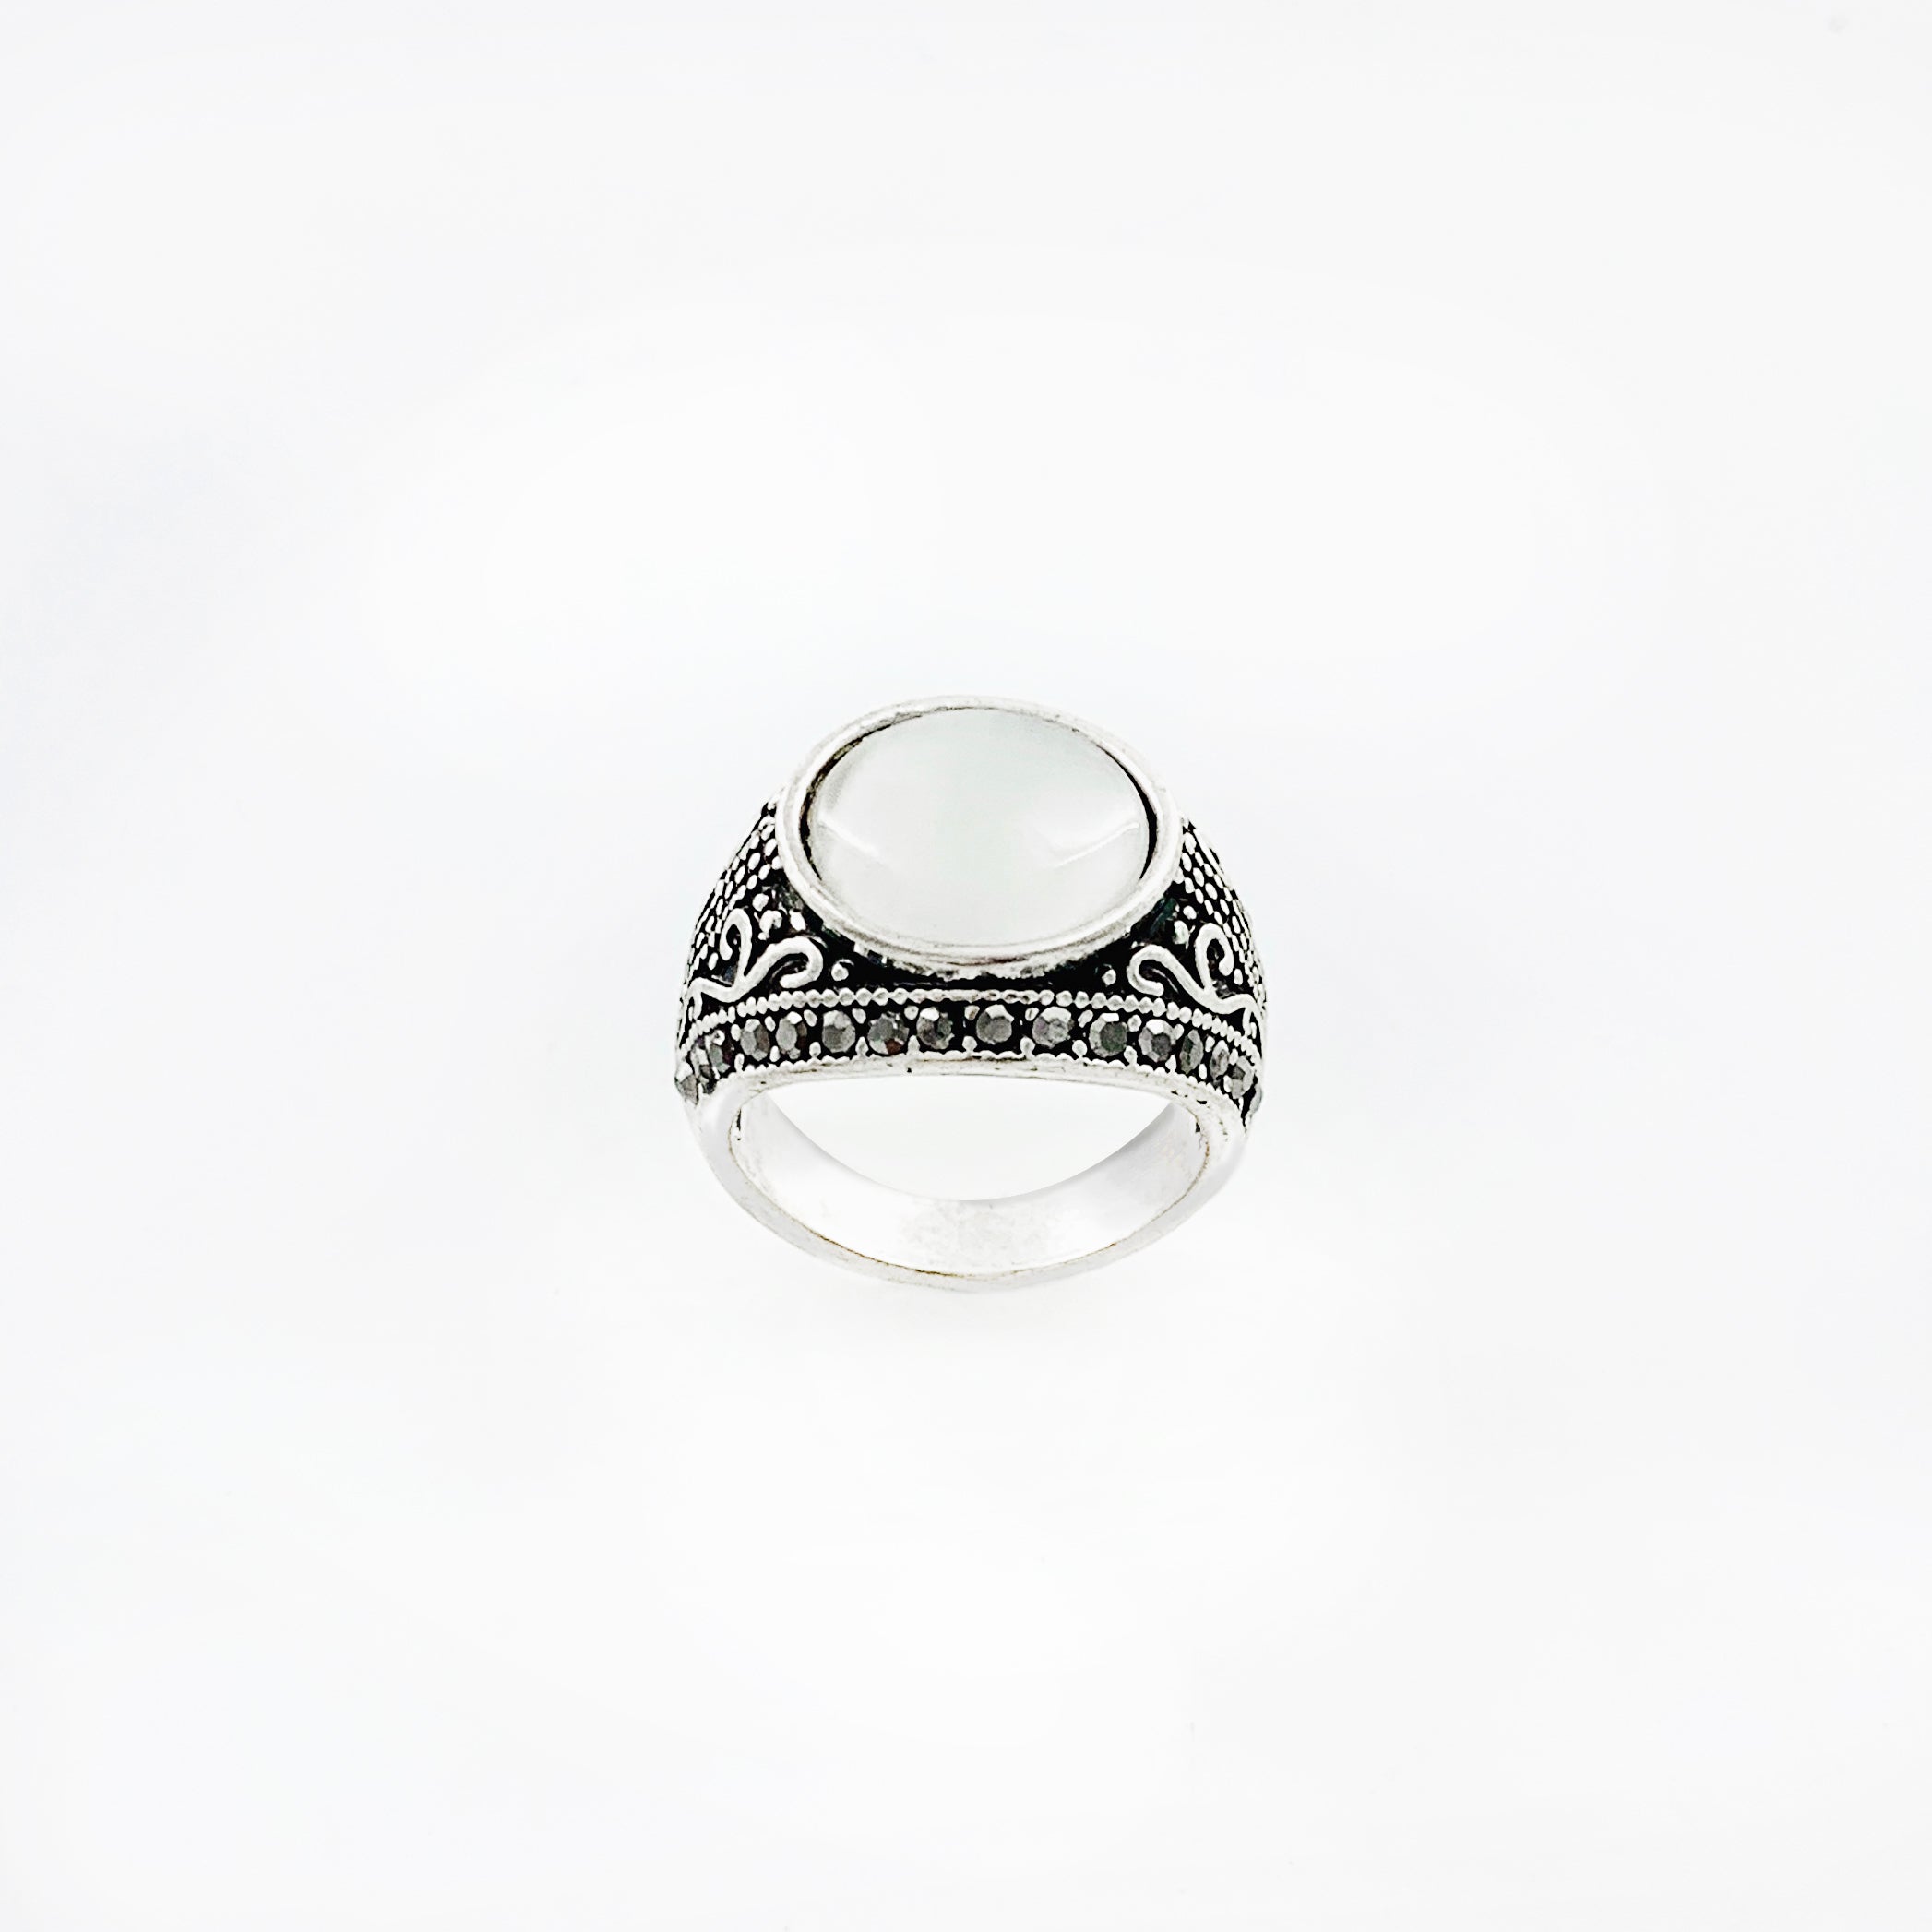 Art deco inspired silver ring with white cateye stone